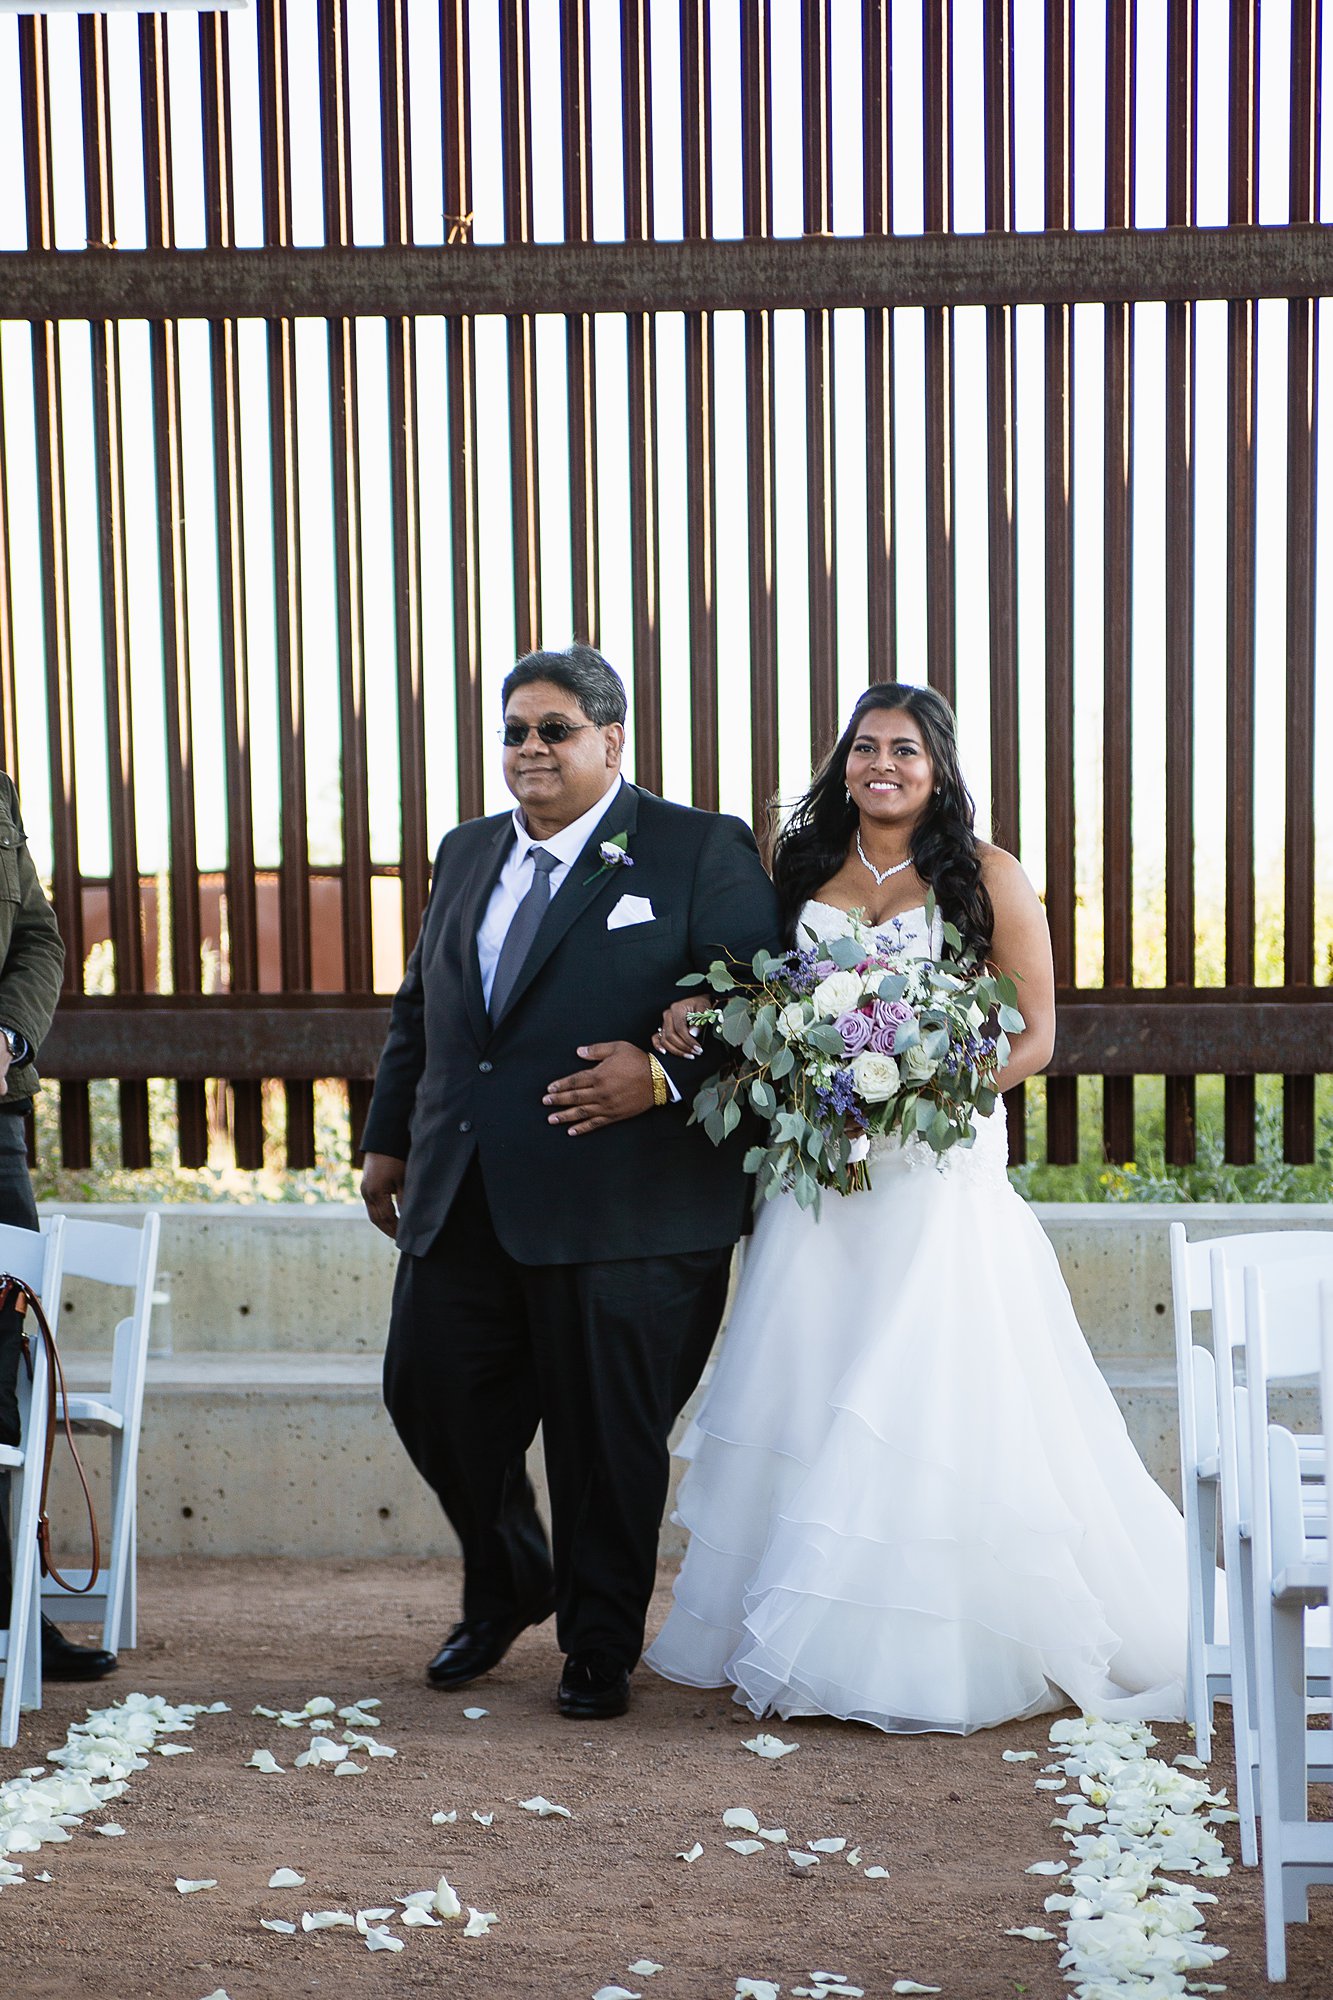 Bride walking down the aisle with her father during wedding ceremony at the Rio Salado Audubon by Phoenix wedding photographers PMA Photography.